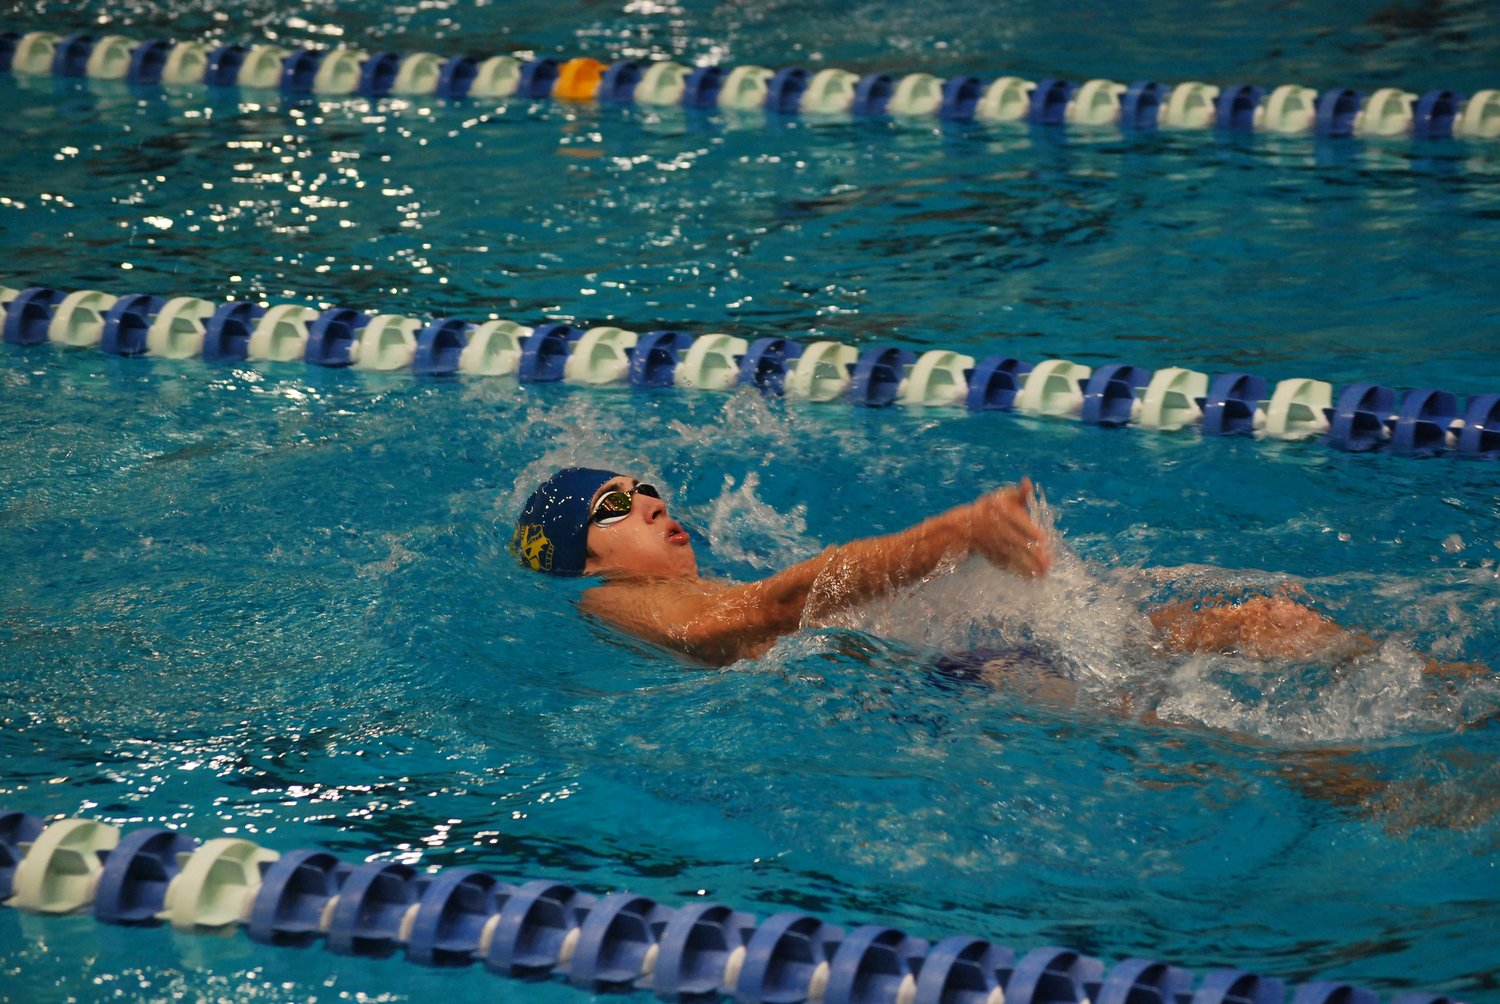 Sophomore Ryan Miller swims the backstroke as part of his race in the 200 IM.